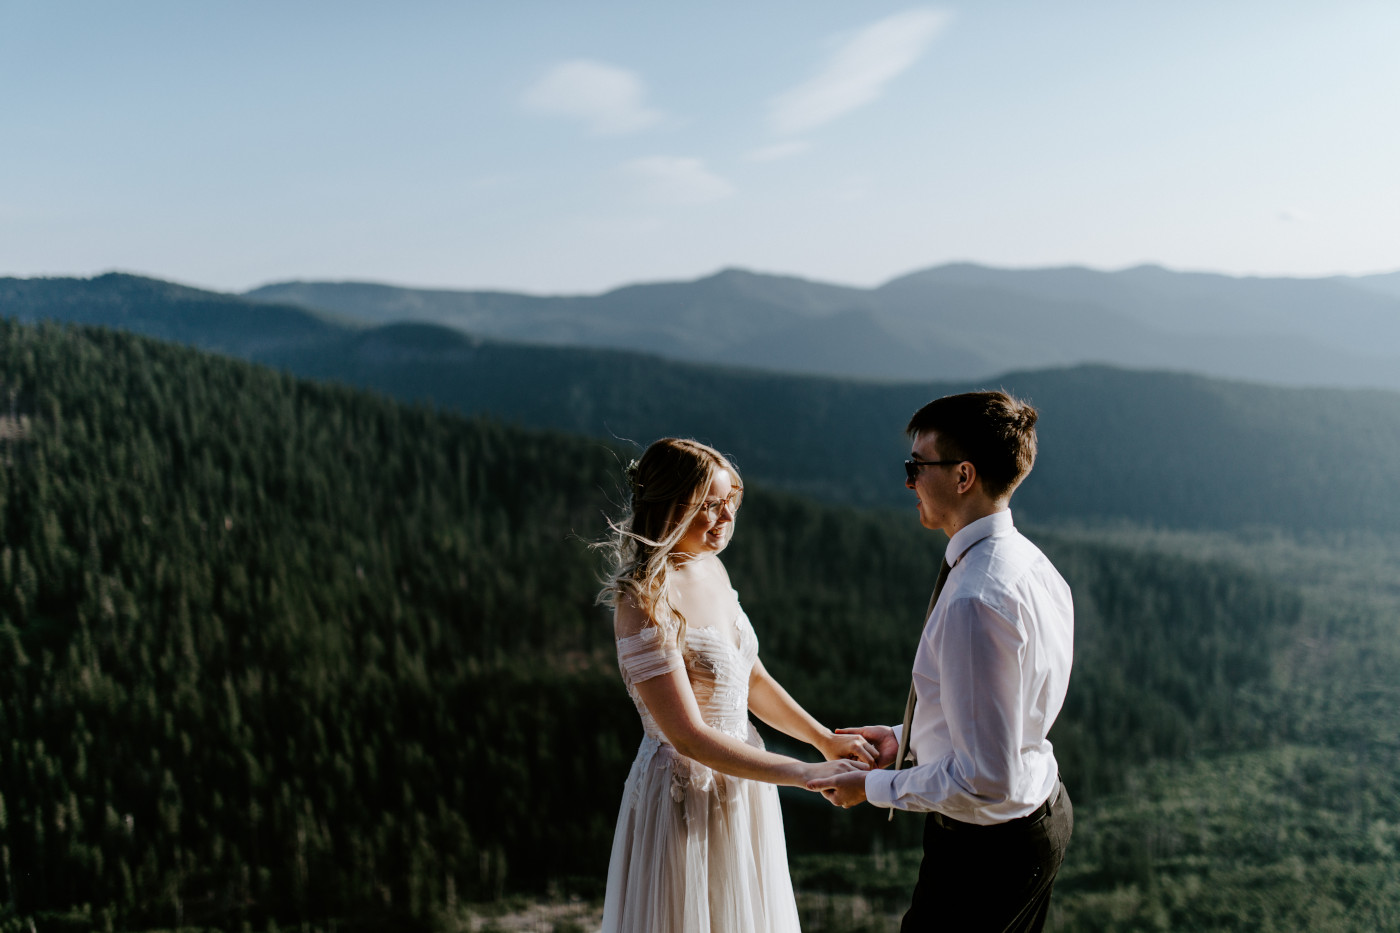 Corey and Kylie stand together and hold hands in Mount Hood National Forest.